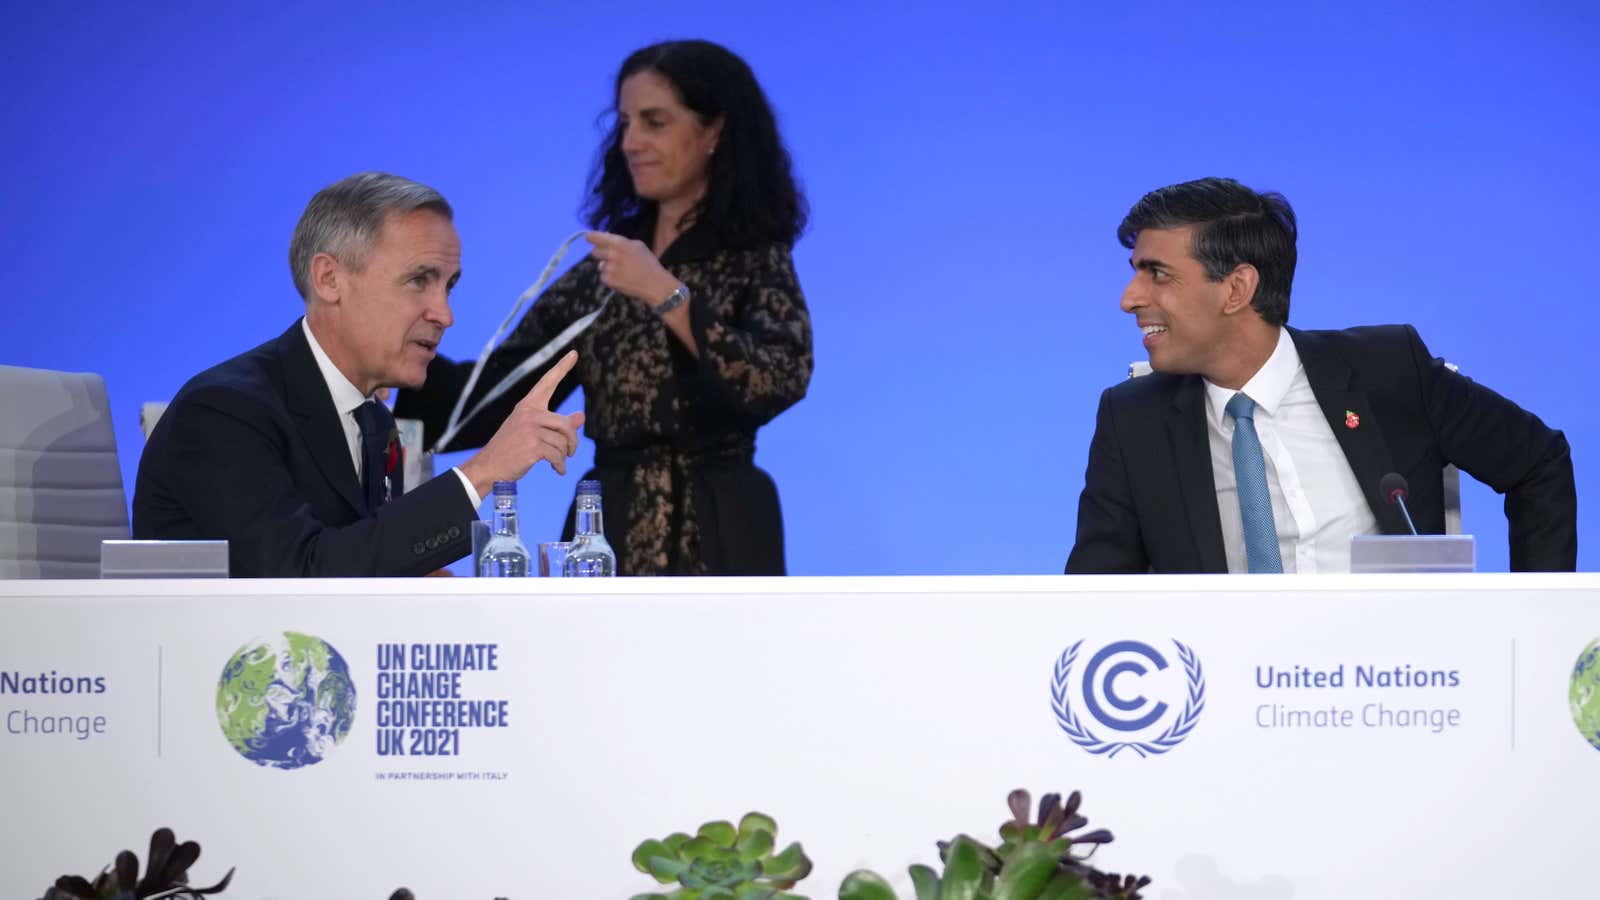 UK chancellor of the exchequer Rishi Sunak and Mark Carney, chair of the Glasgow Financial Alliance for Net Zero, have been wrangling new net zero commitments from financial institutions at COP26.